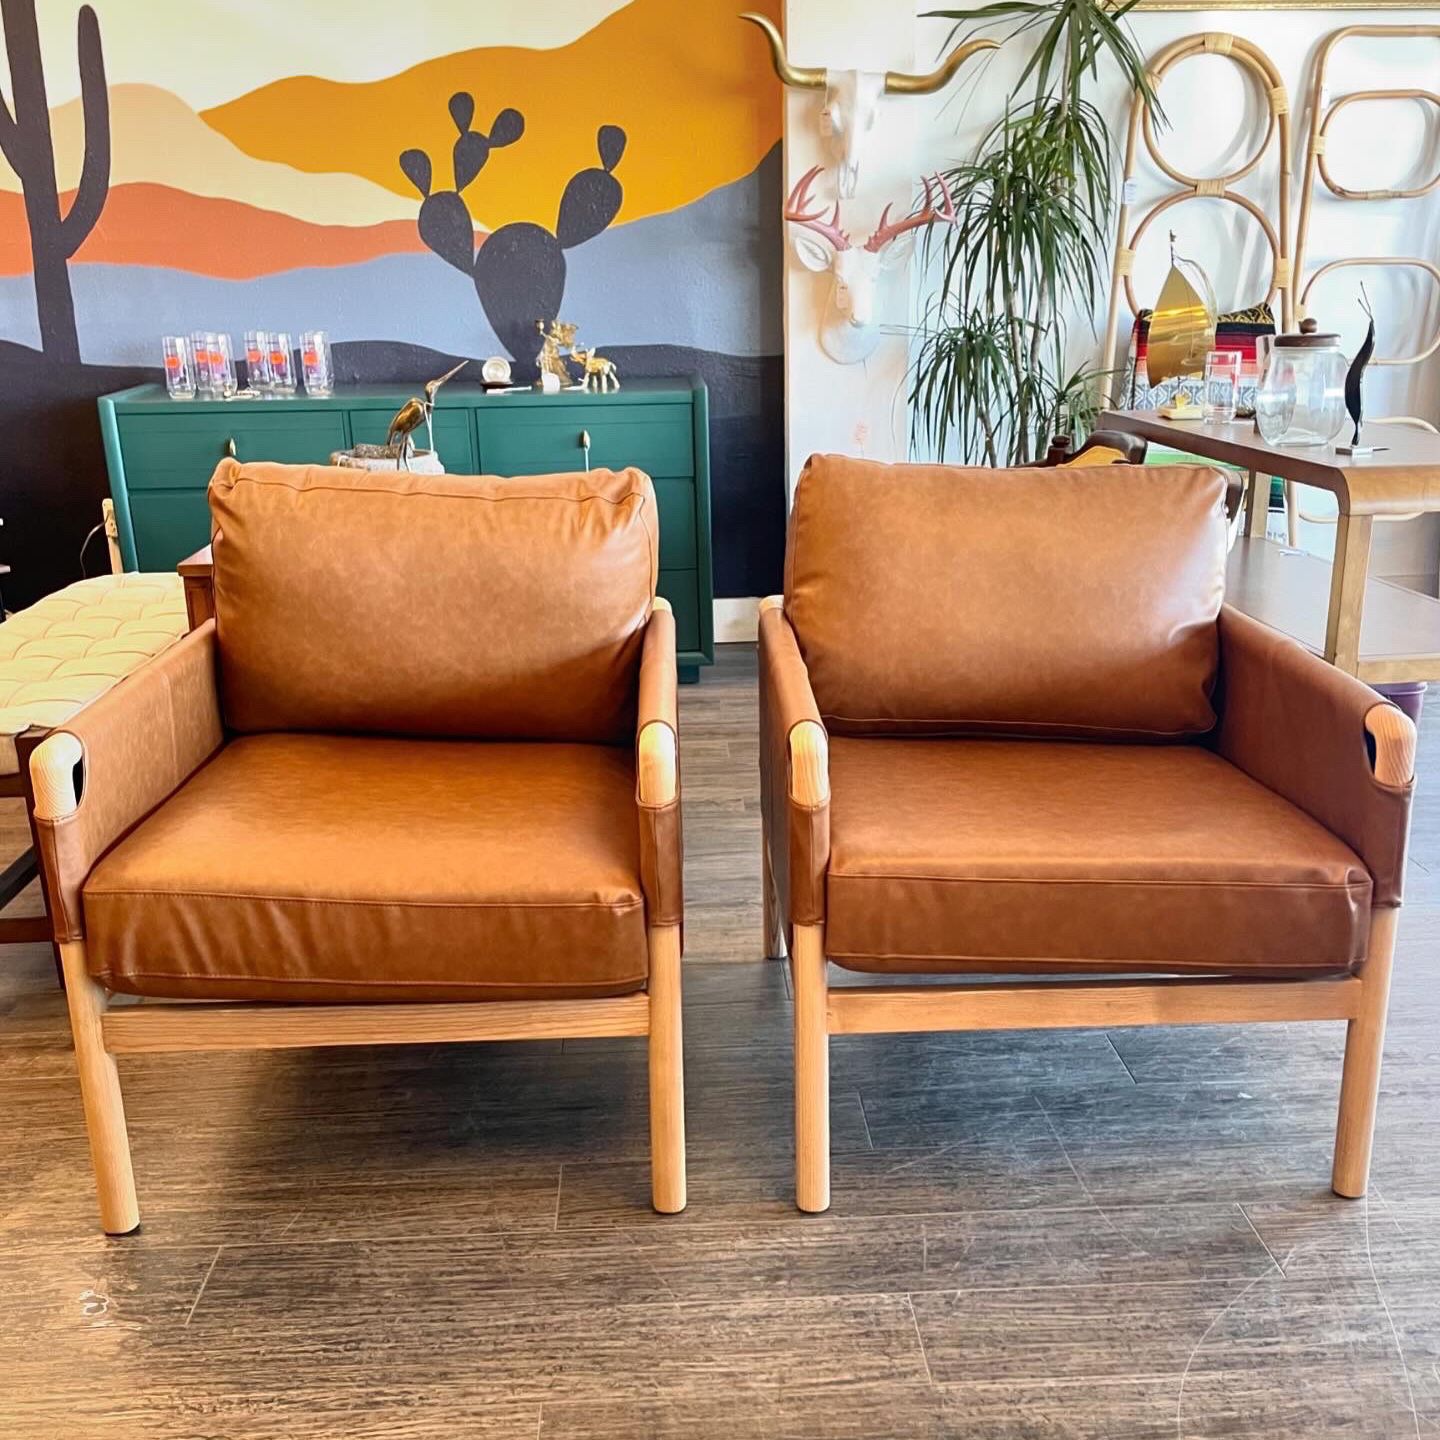 NEW Camel Arm Chairs Mid Century